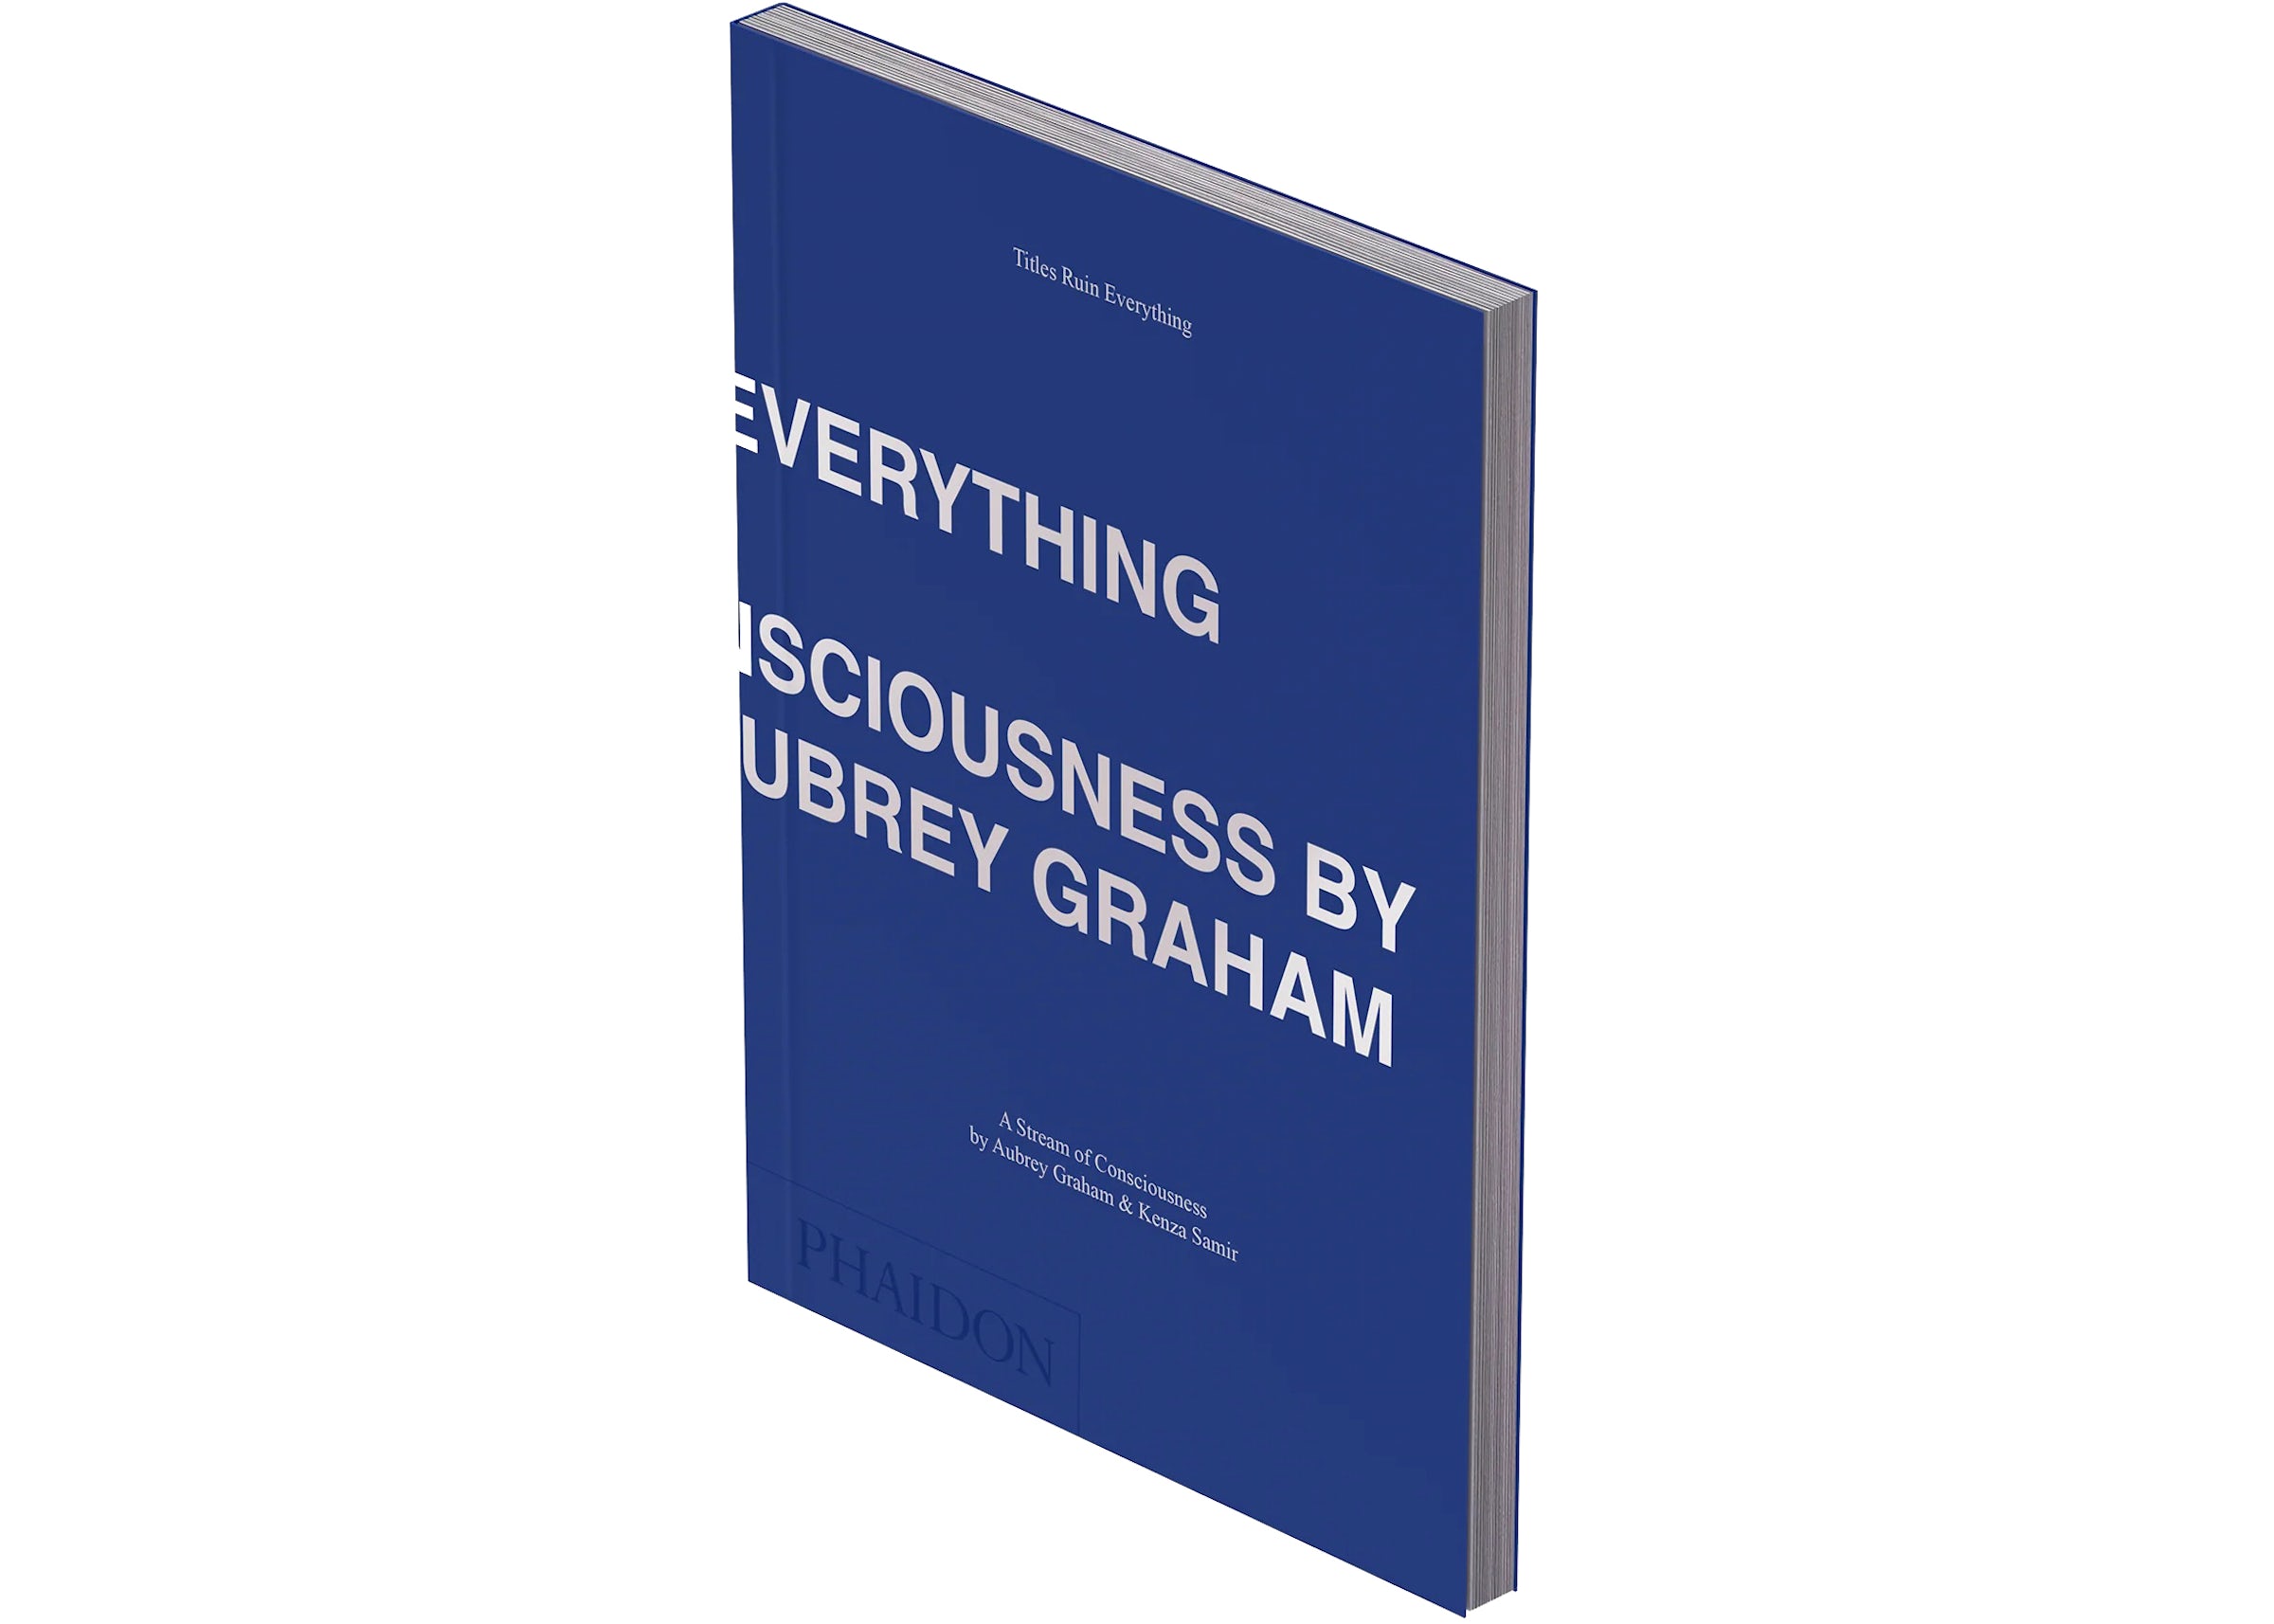 Titles Ruin Everthing A Stream of Consciousness by Aubrey Graham and Kenza Samir Book